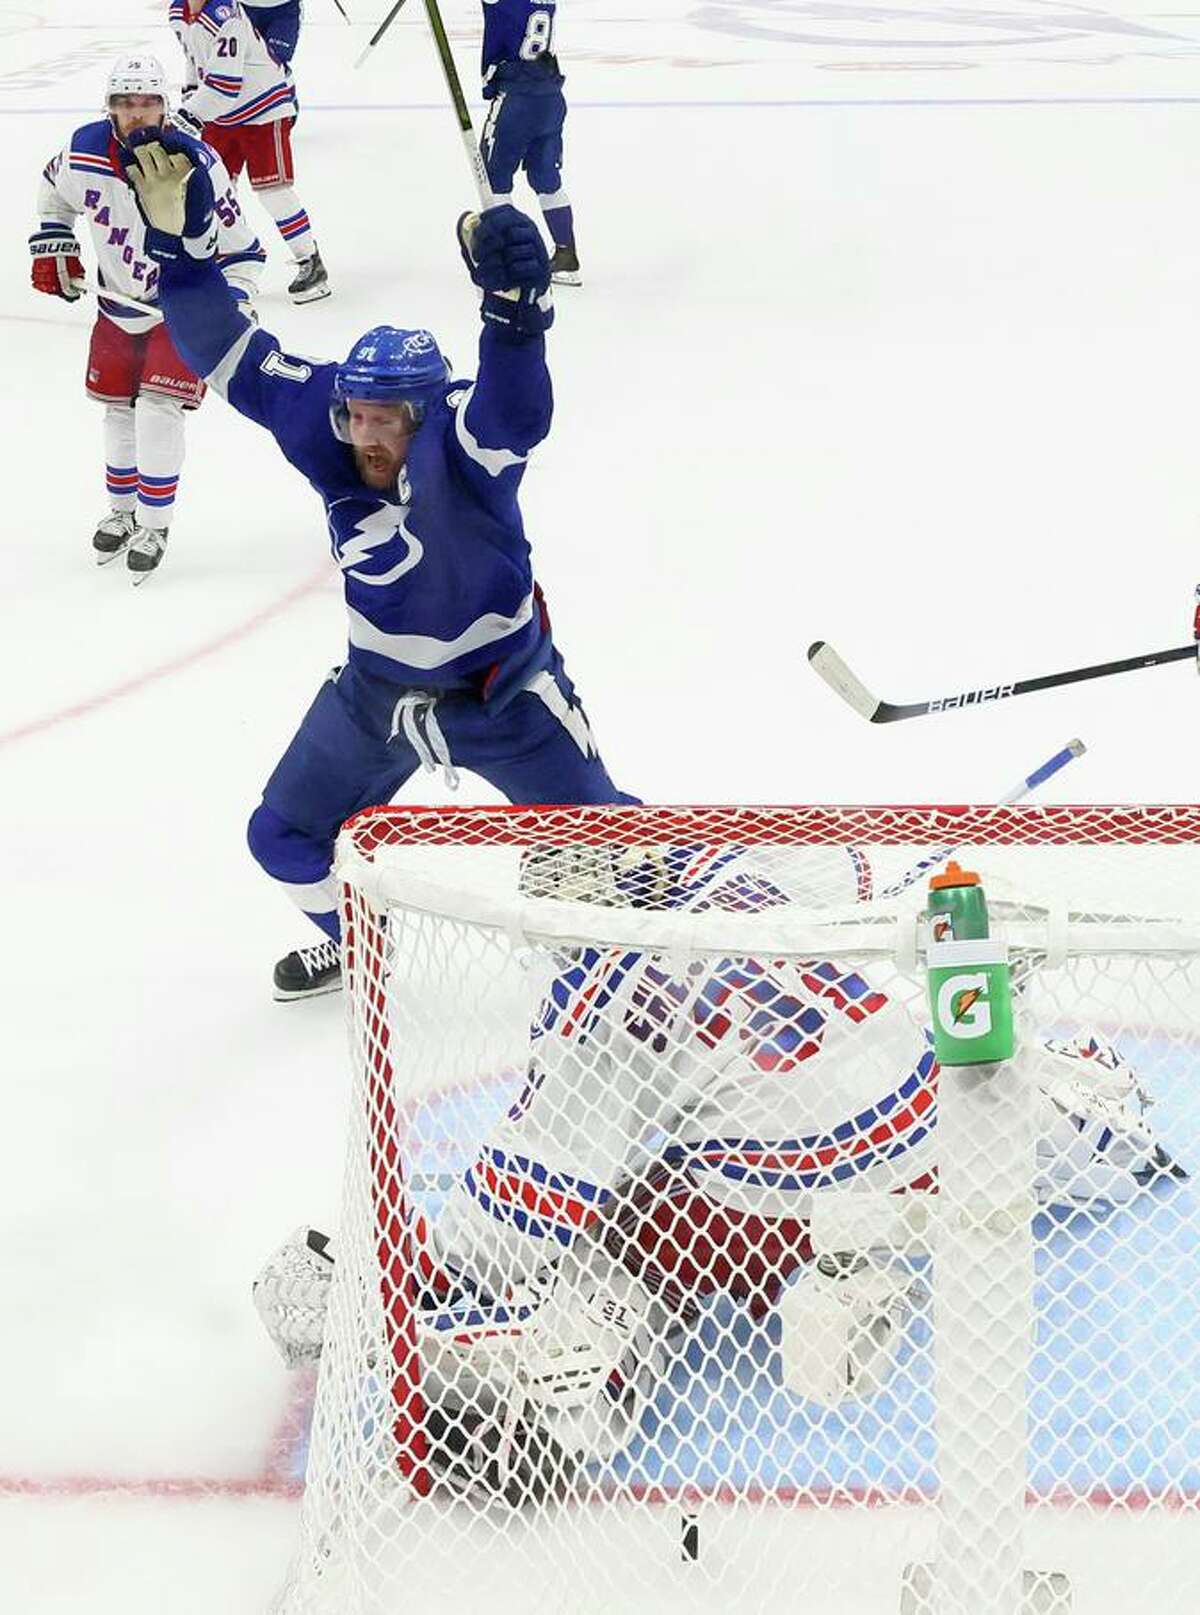 Steven Stamkos of the Lightning celebrates the go-ahead goal scored by Ondrej Palat with less than a minute left in the third period in Game 3 of the Eastern Conference finals in Tampa, Fla. Tampa Bay’s win narrowed the gap in the series to a 2-1 New York lead.